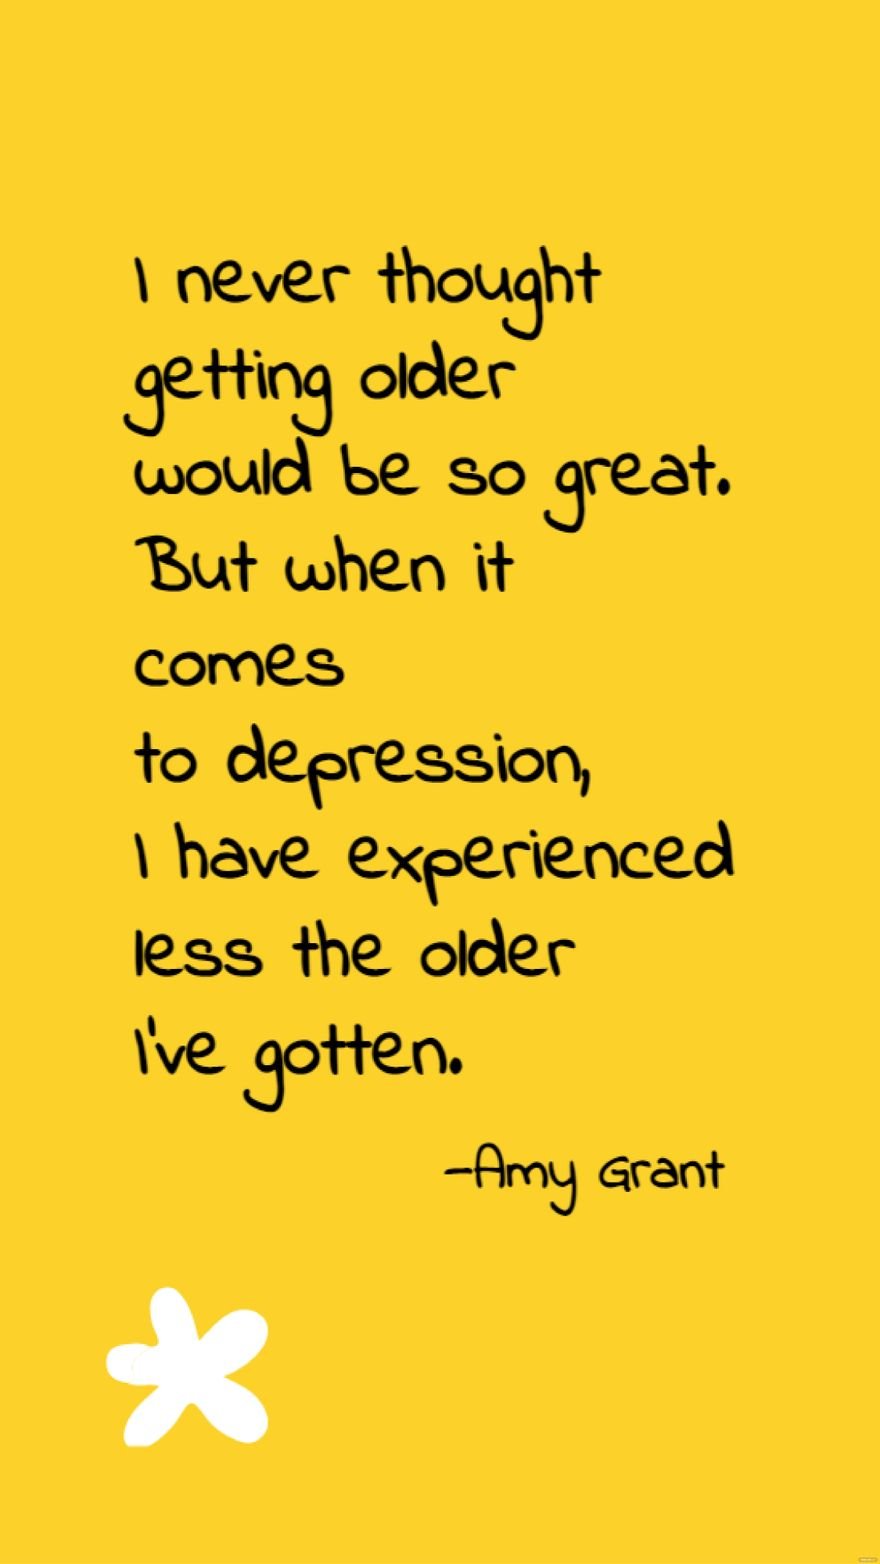 Amy Grant  I never thought getting older would be so great But when it comes to depression I have experienced less the older Ive gotten